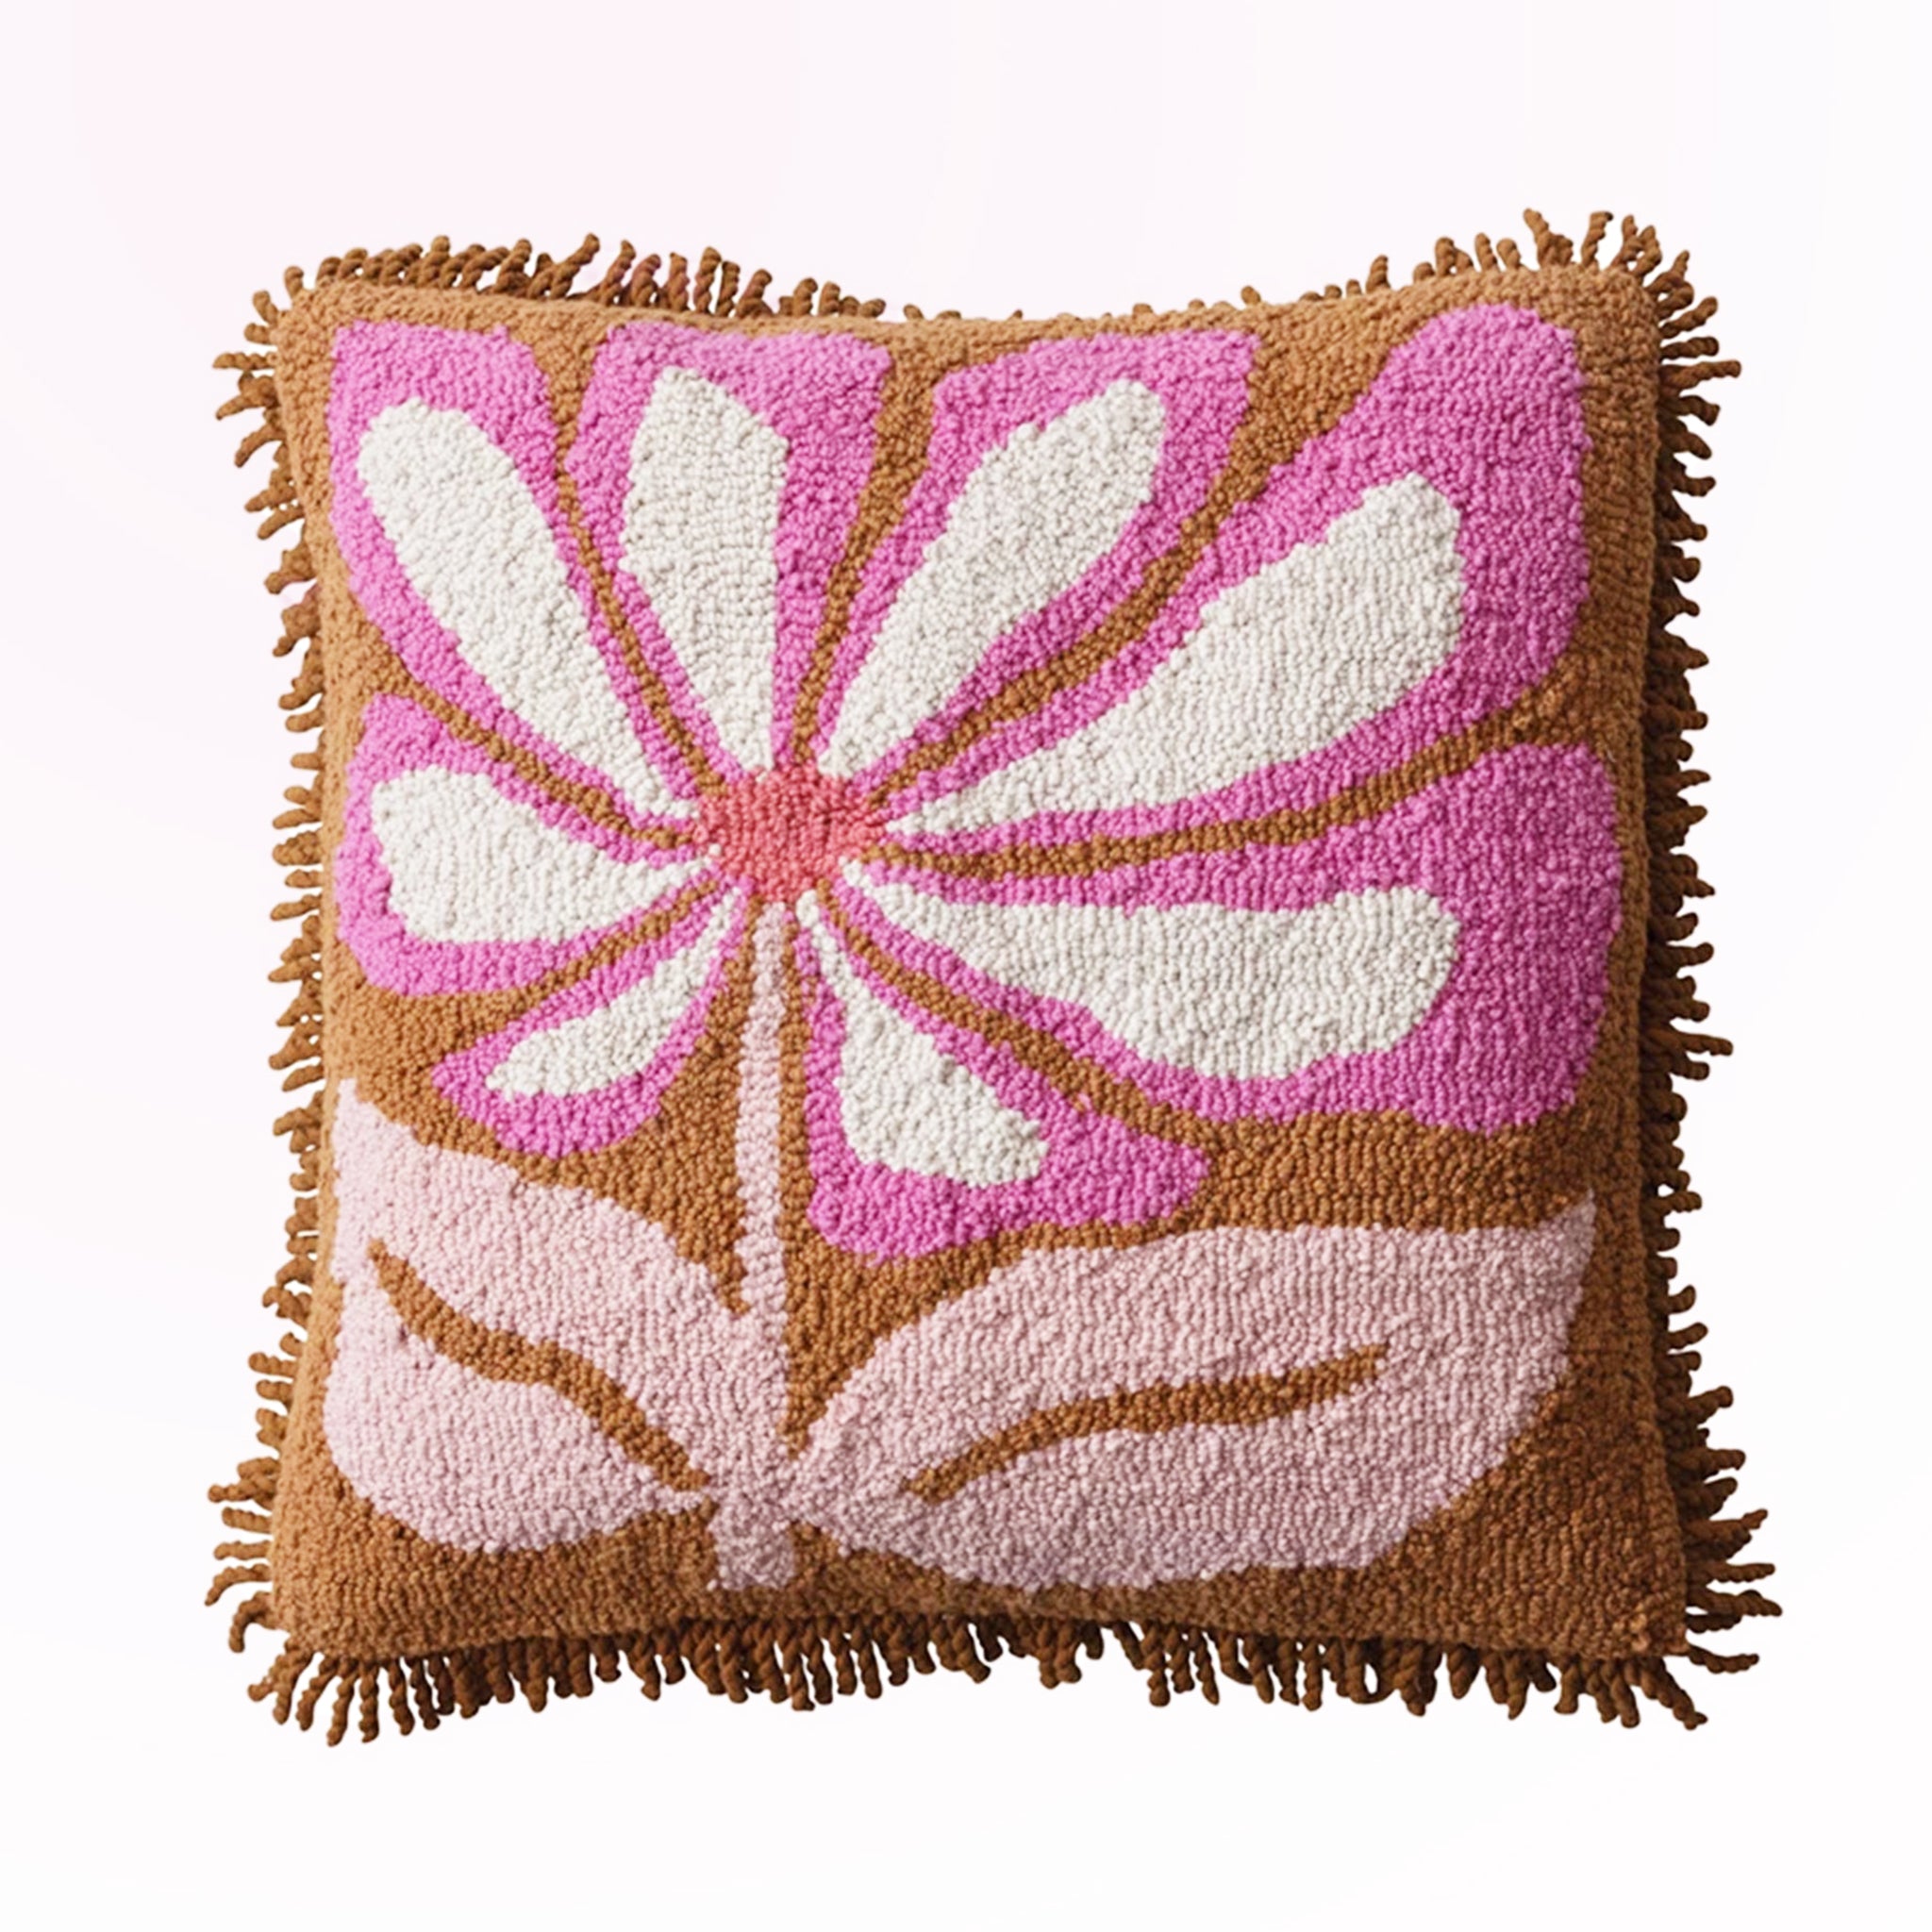 On a pink background is a tan, pink and white square pillow with a fringe edge and flower design.